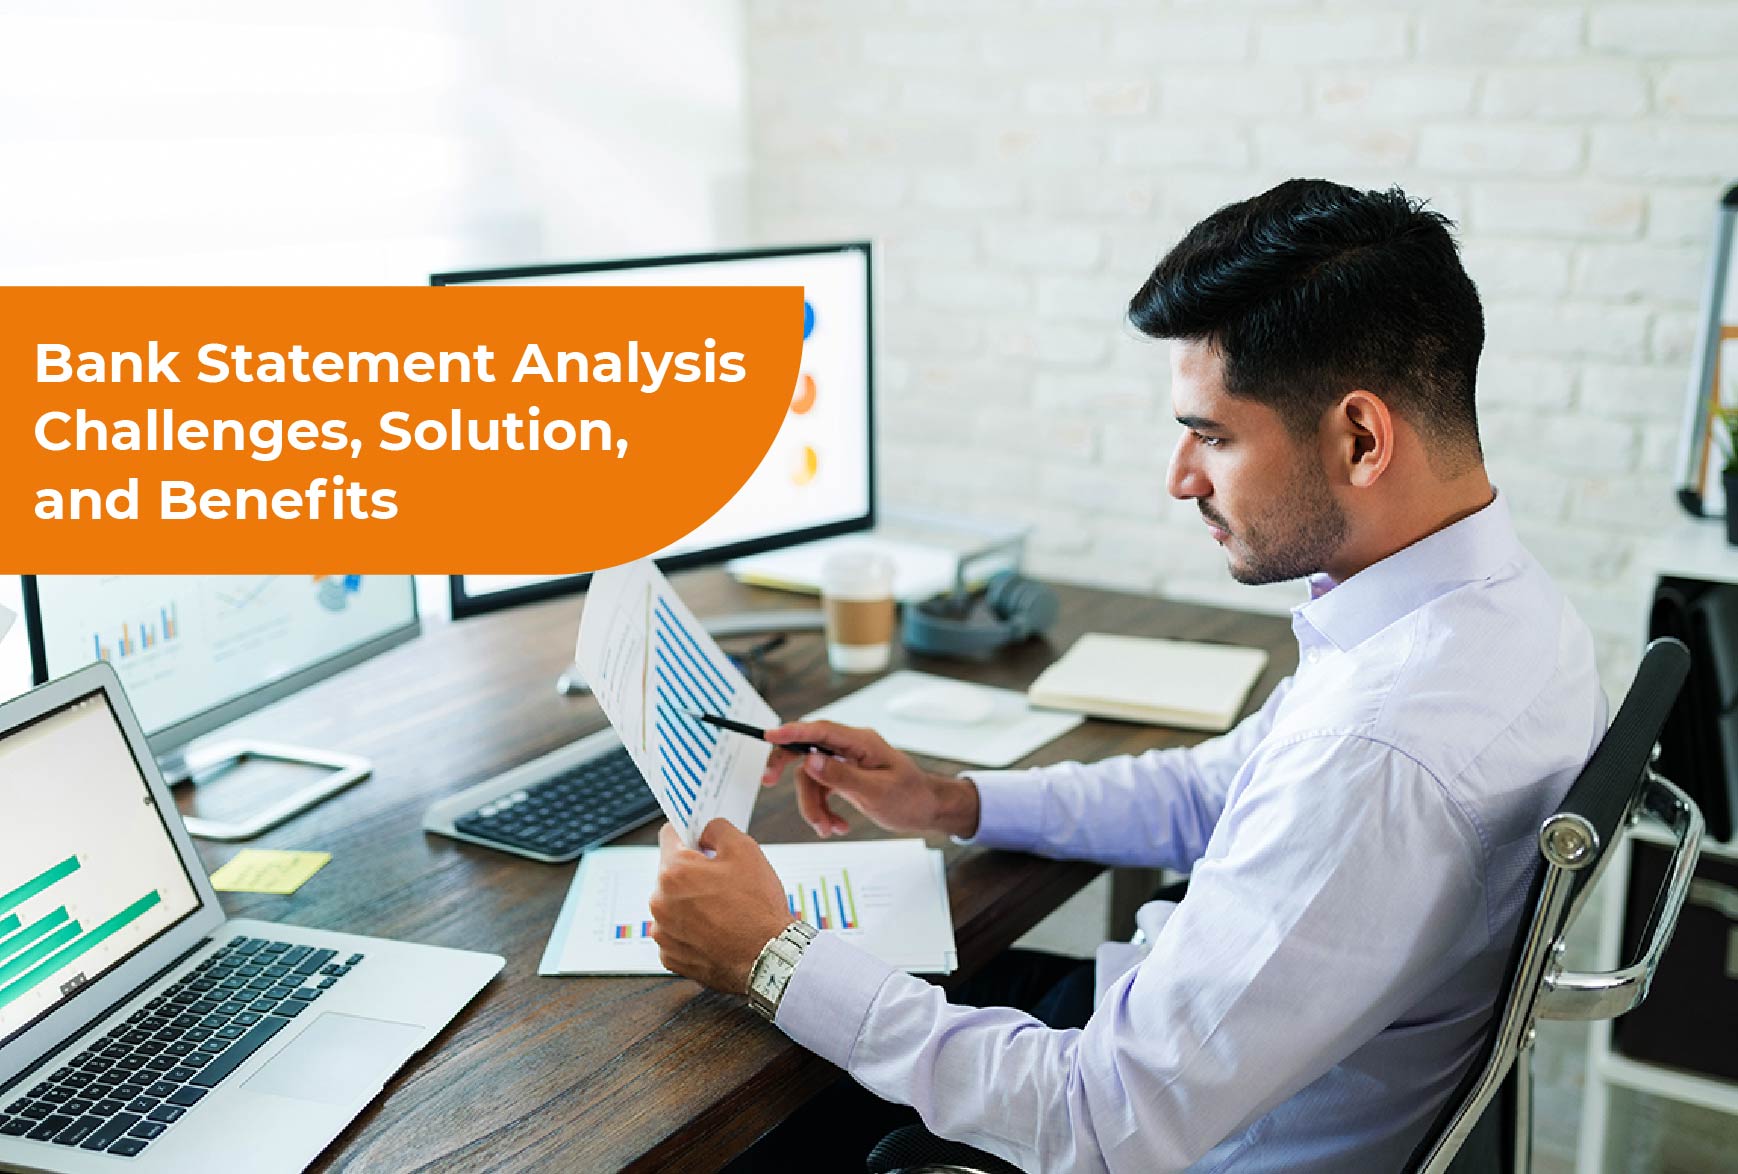 Bank Statement Analysis Challenges, Solution, and Benefits